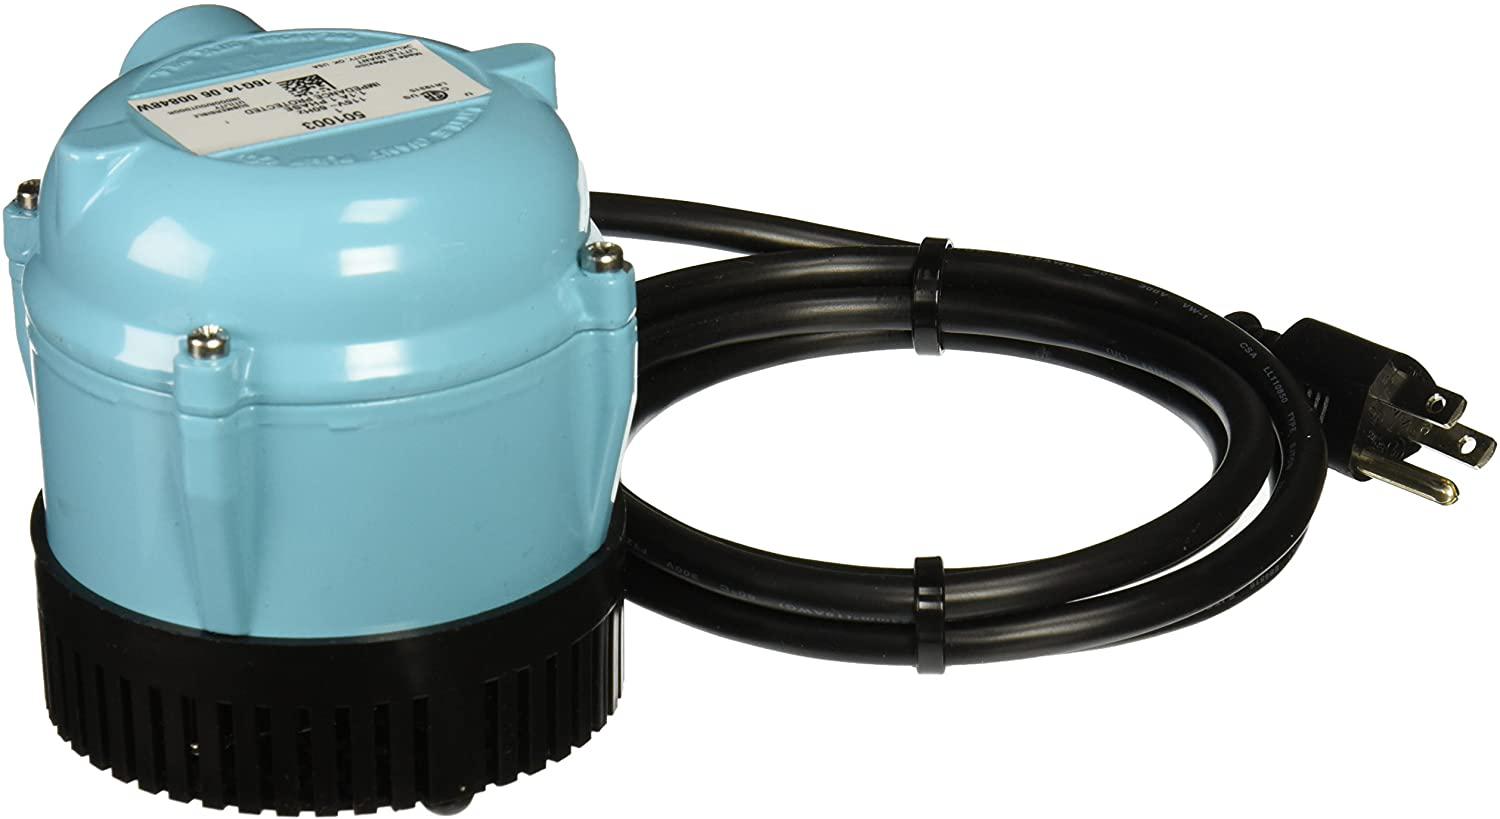 Little Giant 501003 1 115 Volt 205 GPH Oil-Filled Small Submersible Pump